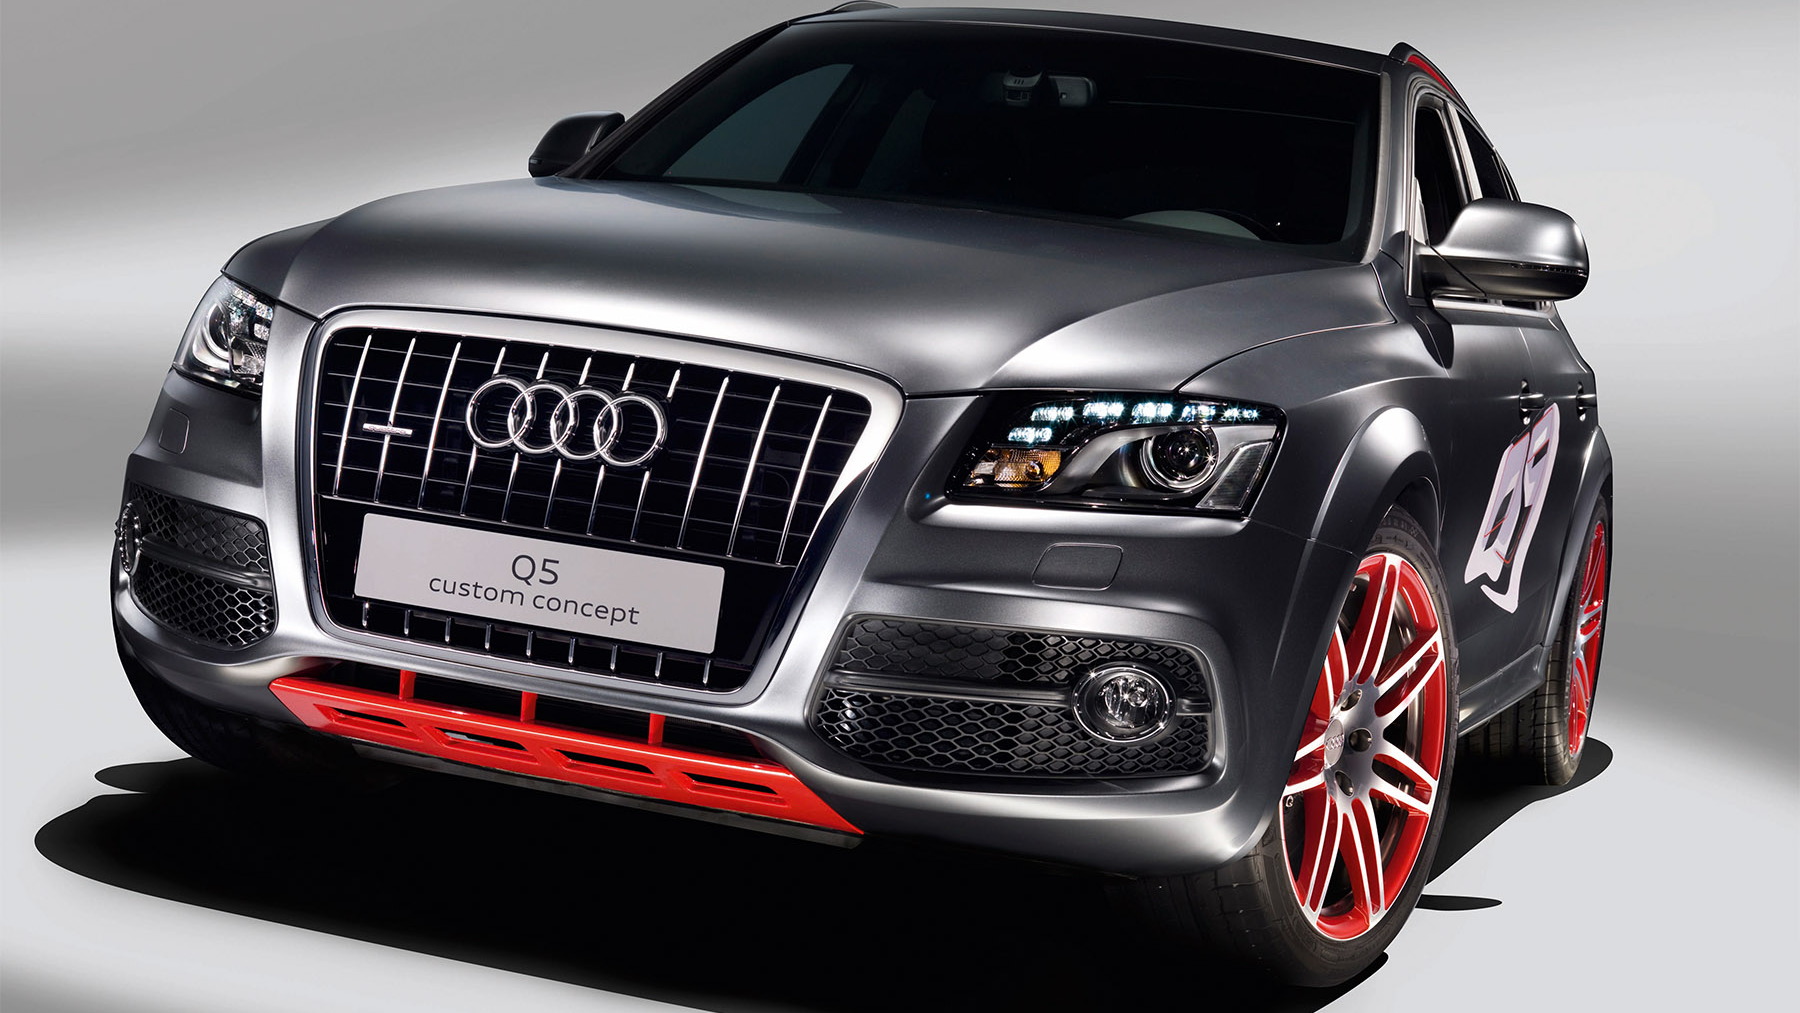 2009 audi q5 worthersee concept 001